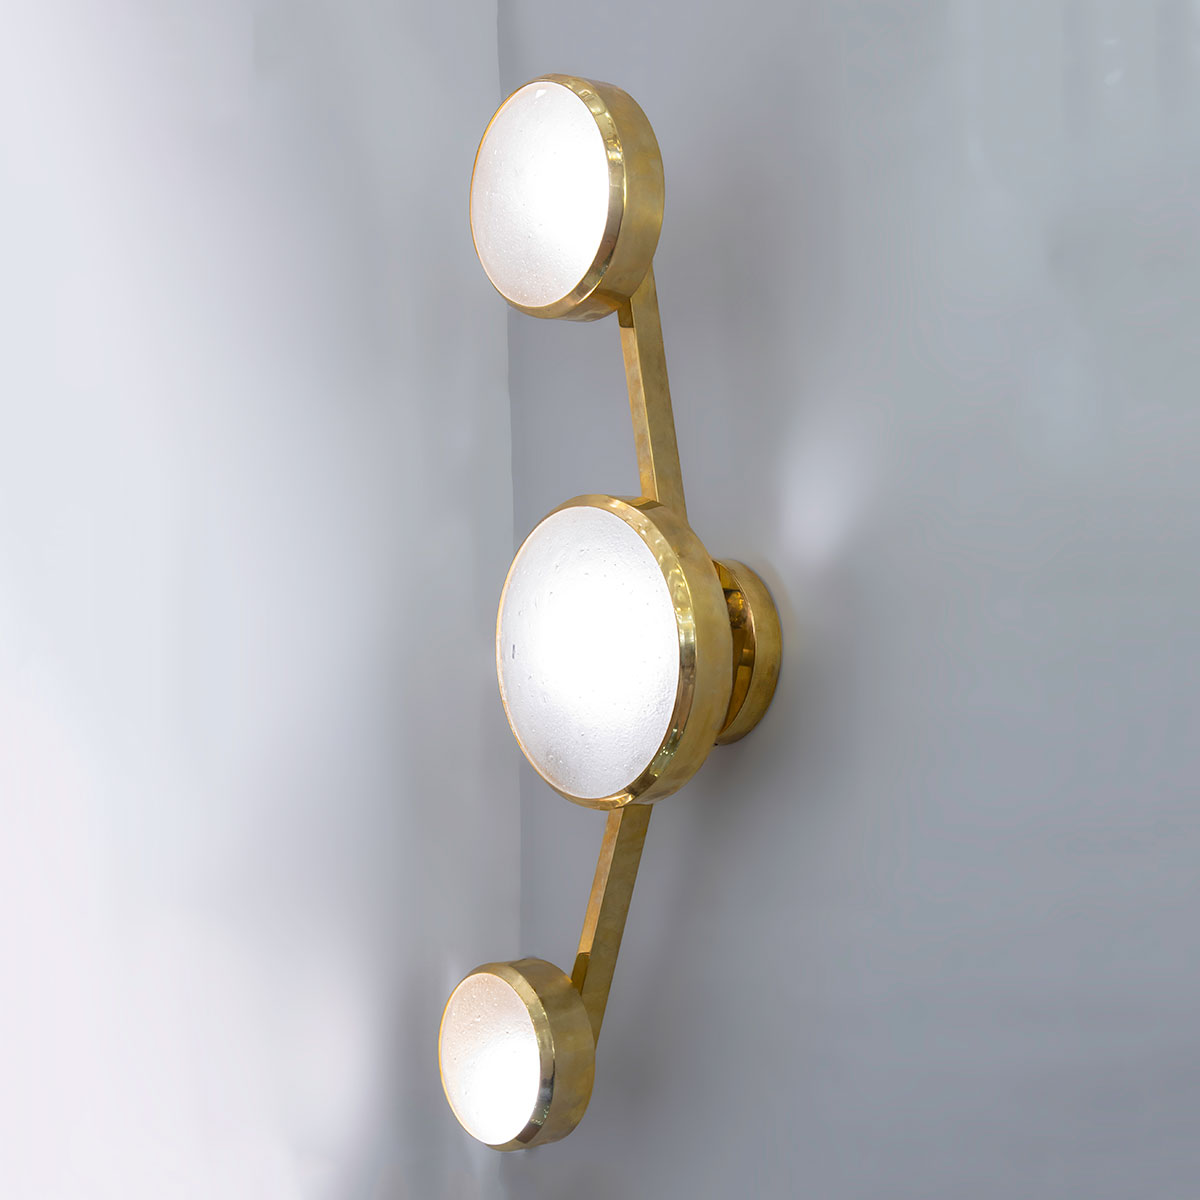 geo wall light by gaspare asaro